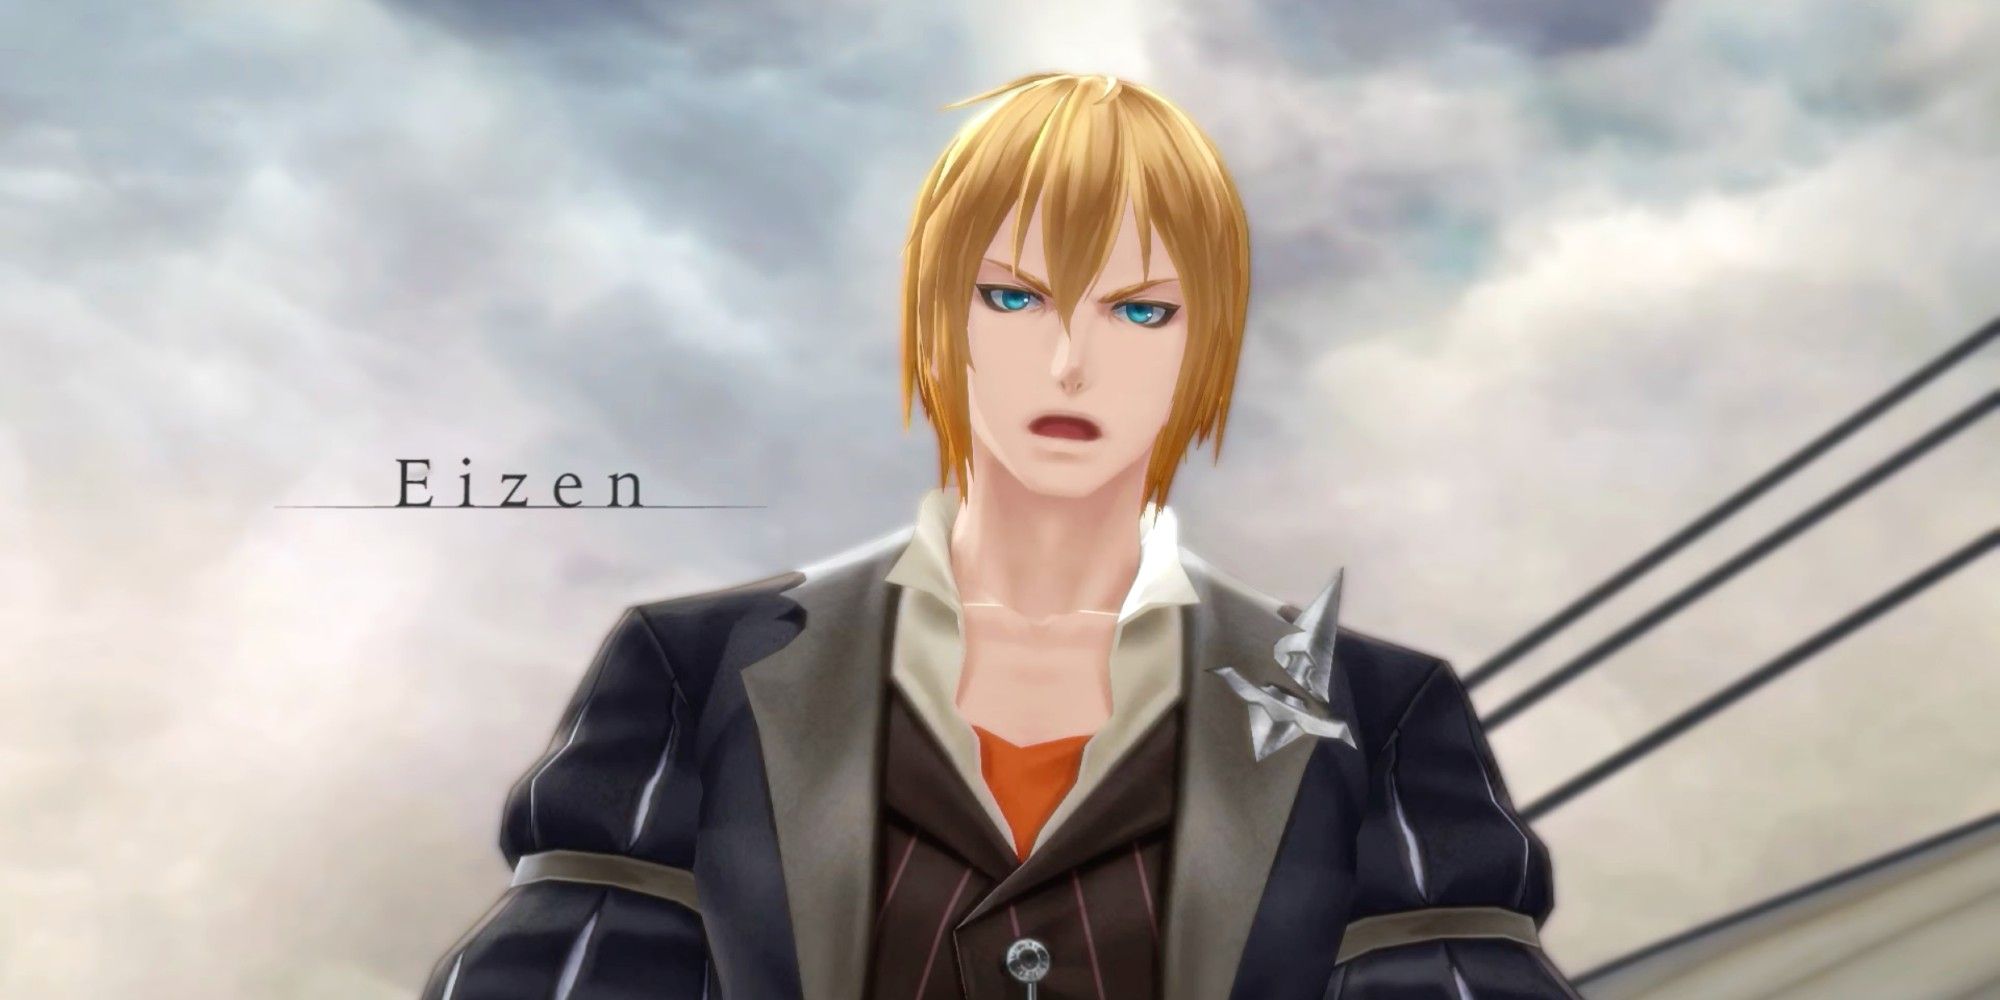 Eizen Tales of Berseria talks to the men on his ship